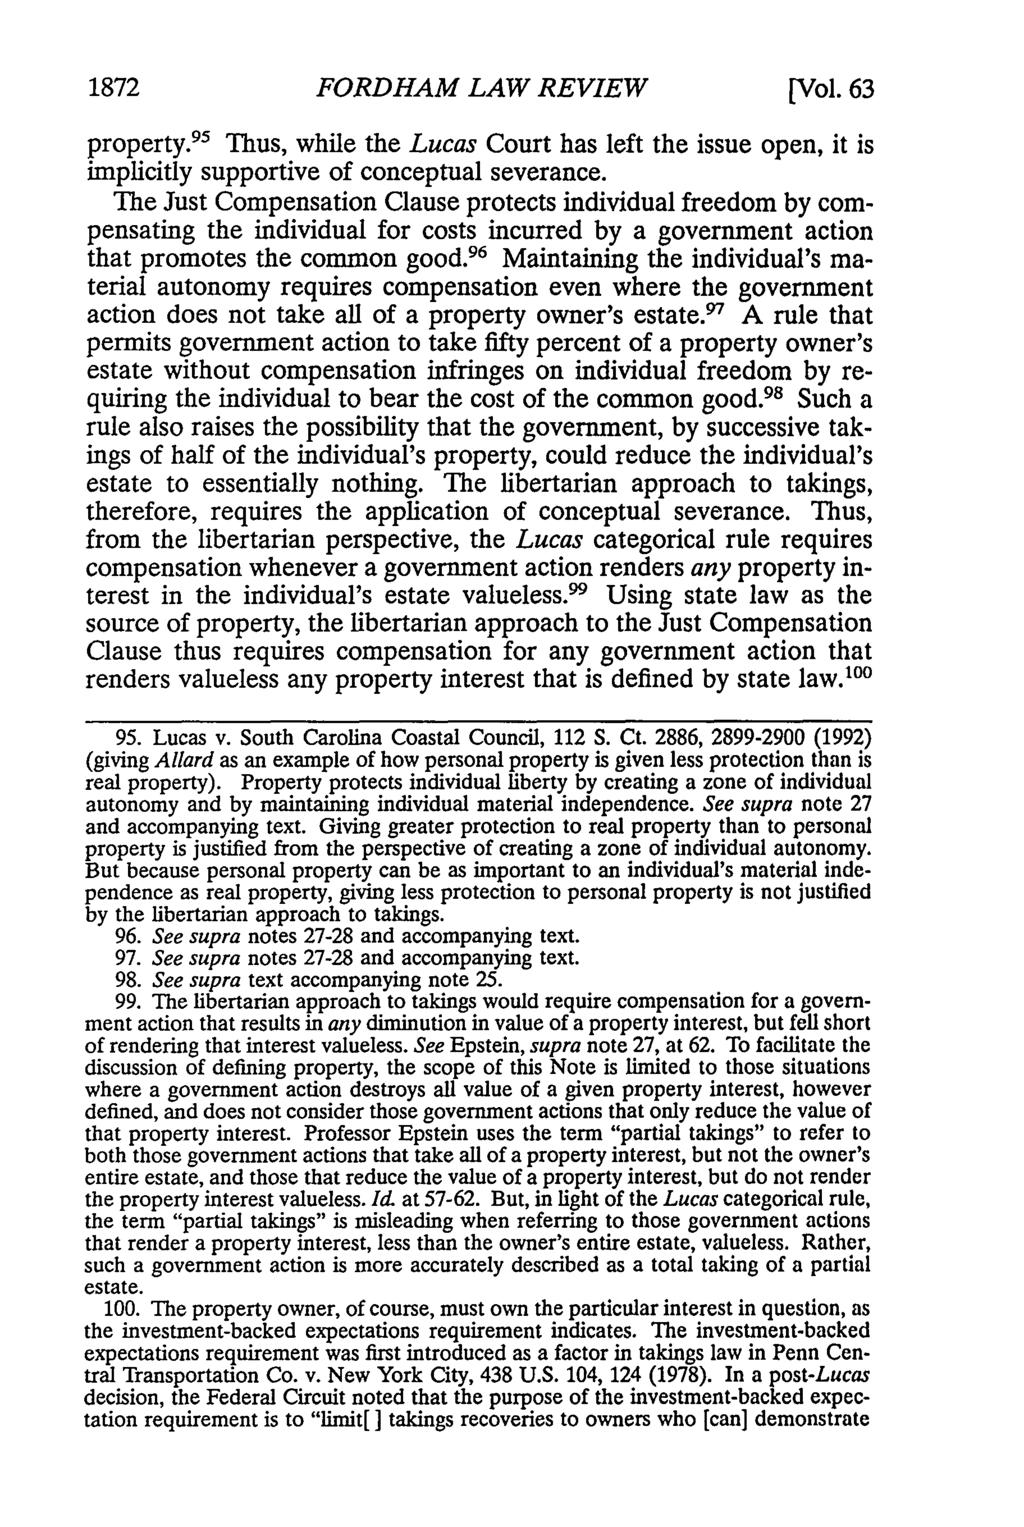 1872 FORDHAM LAW REVIEW [V9ol. 63 property. 9 5 Thus, while the Lucas Court has left the issue open, it is implicitly supportive of conceptual severance.